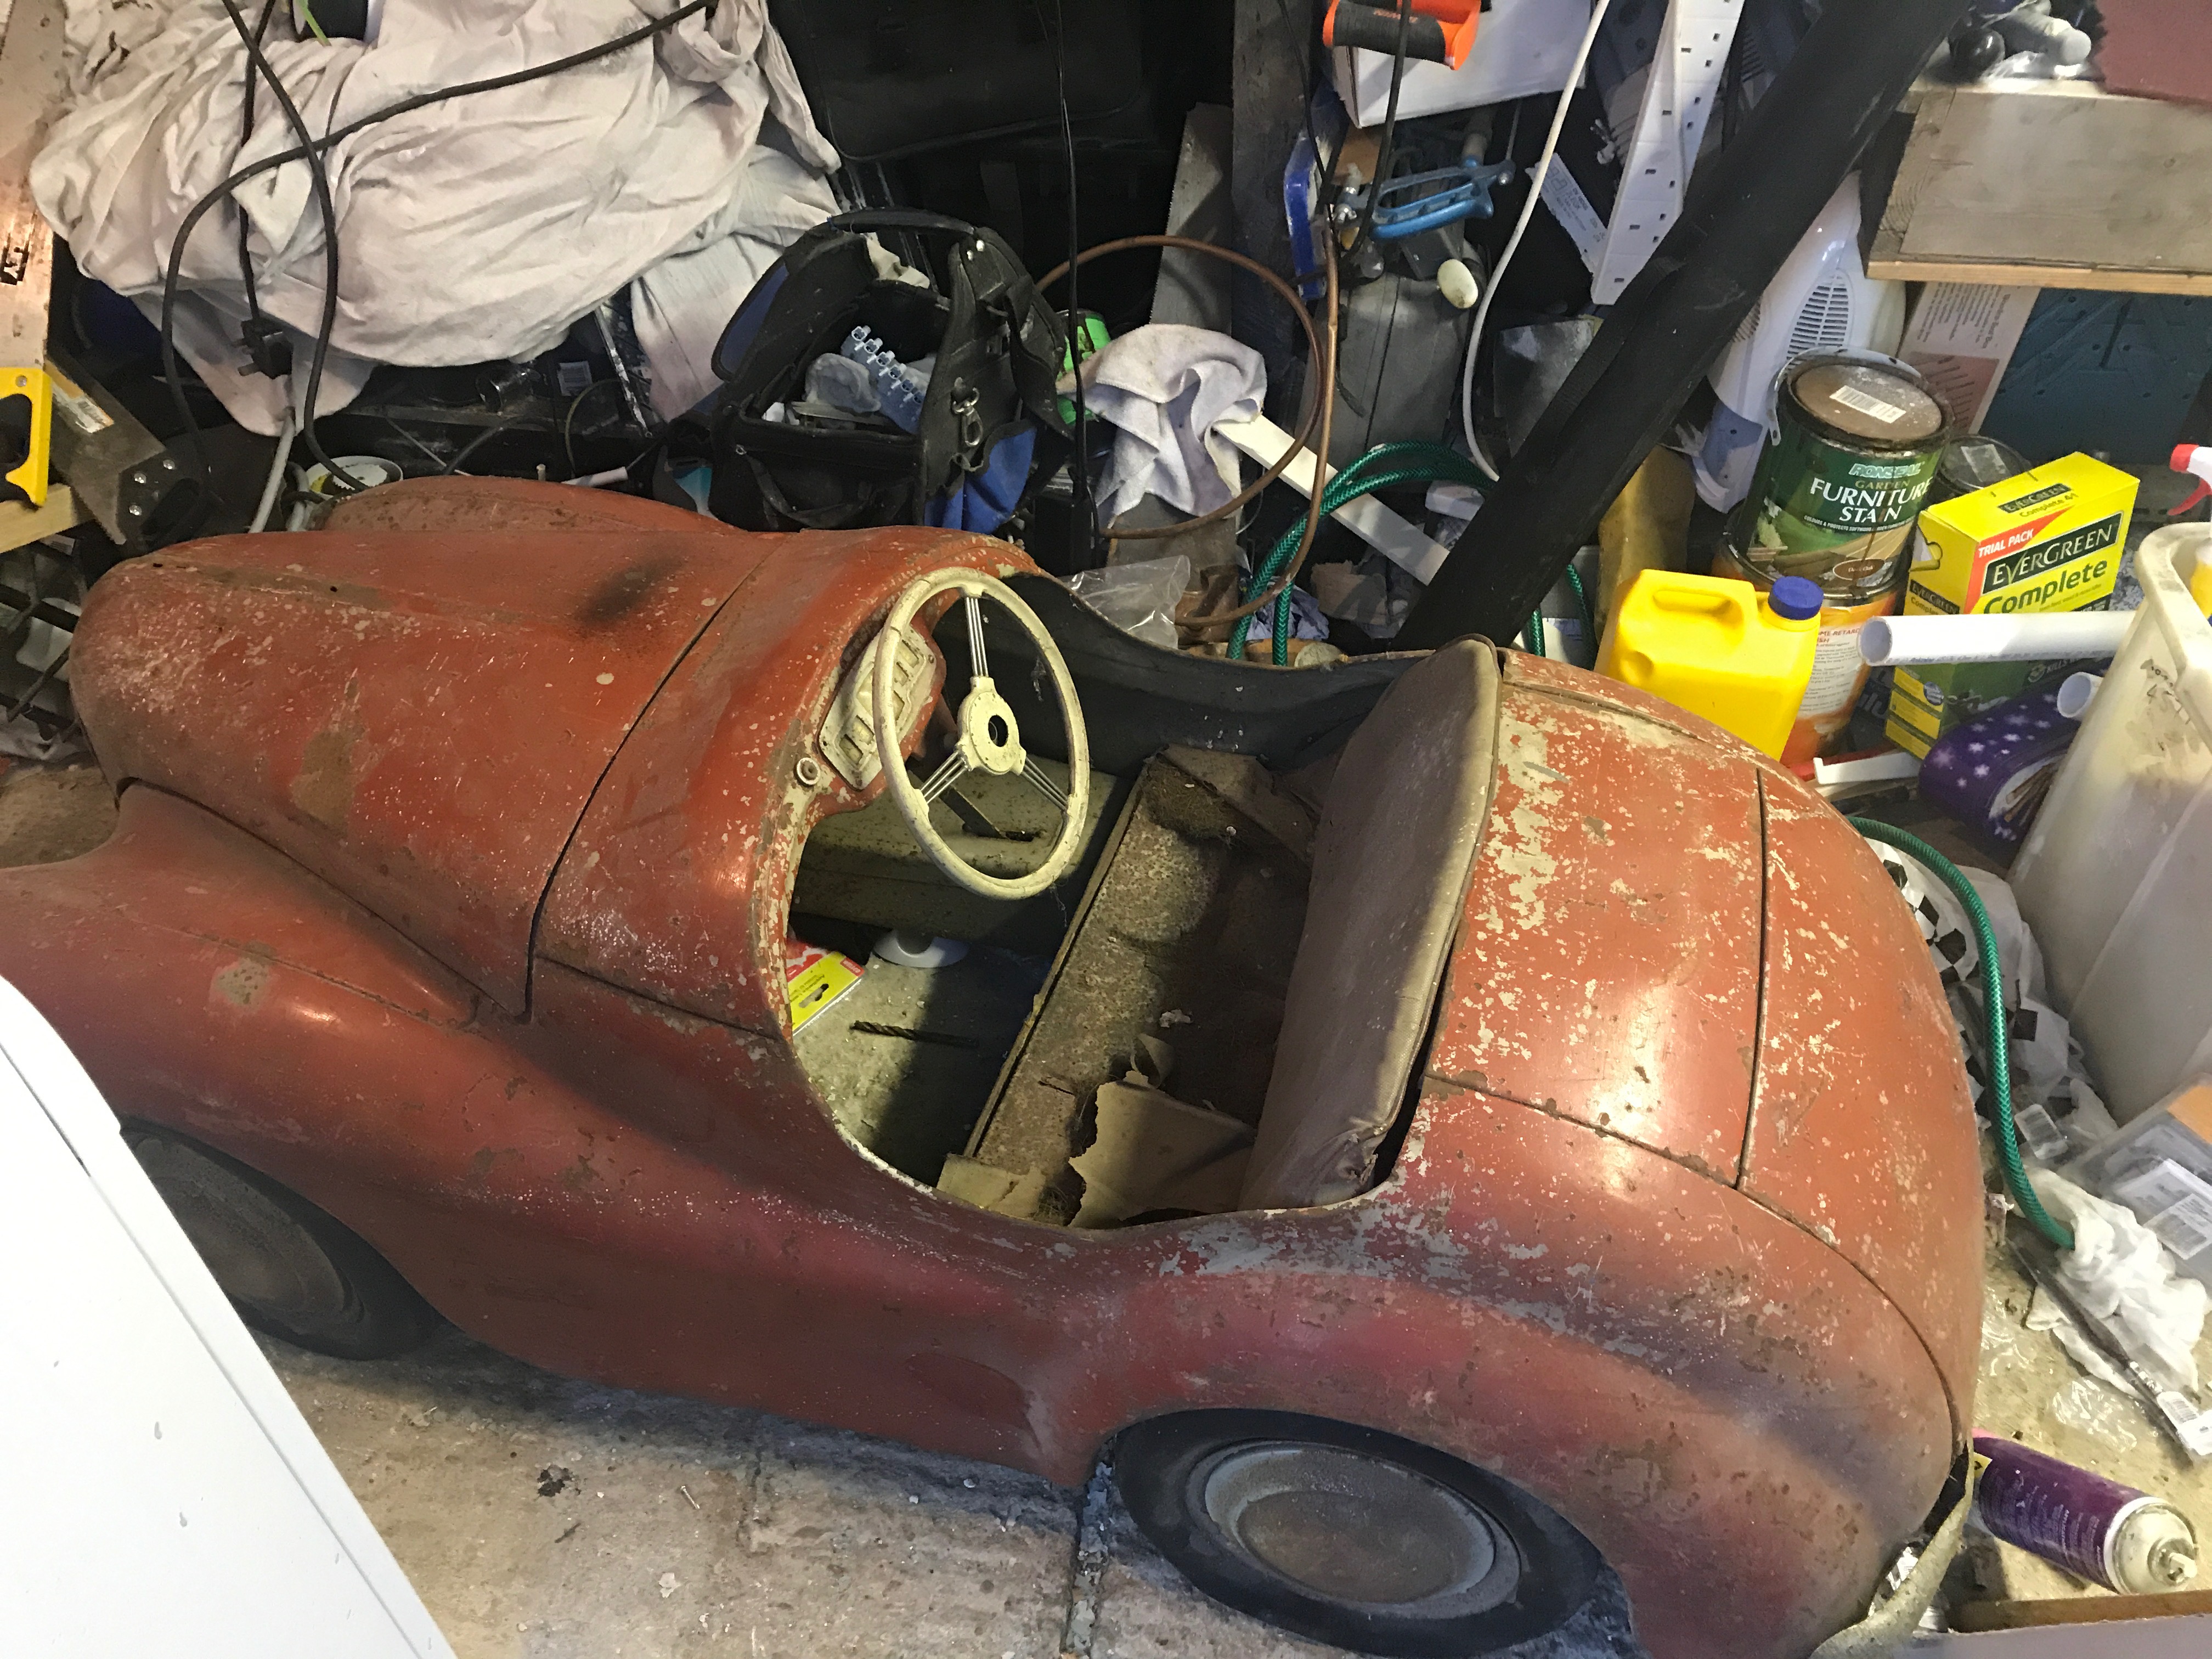 An Early Austin J40 Pedal Car, would benefit from restoration, serial number 16909.